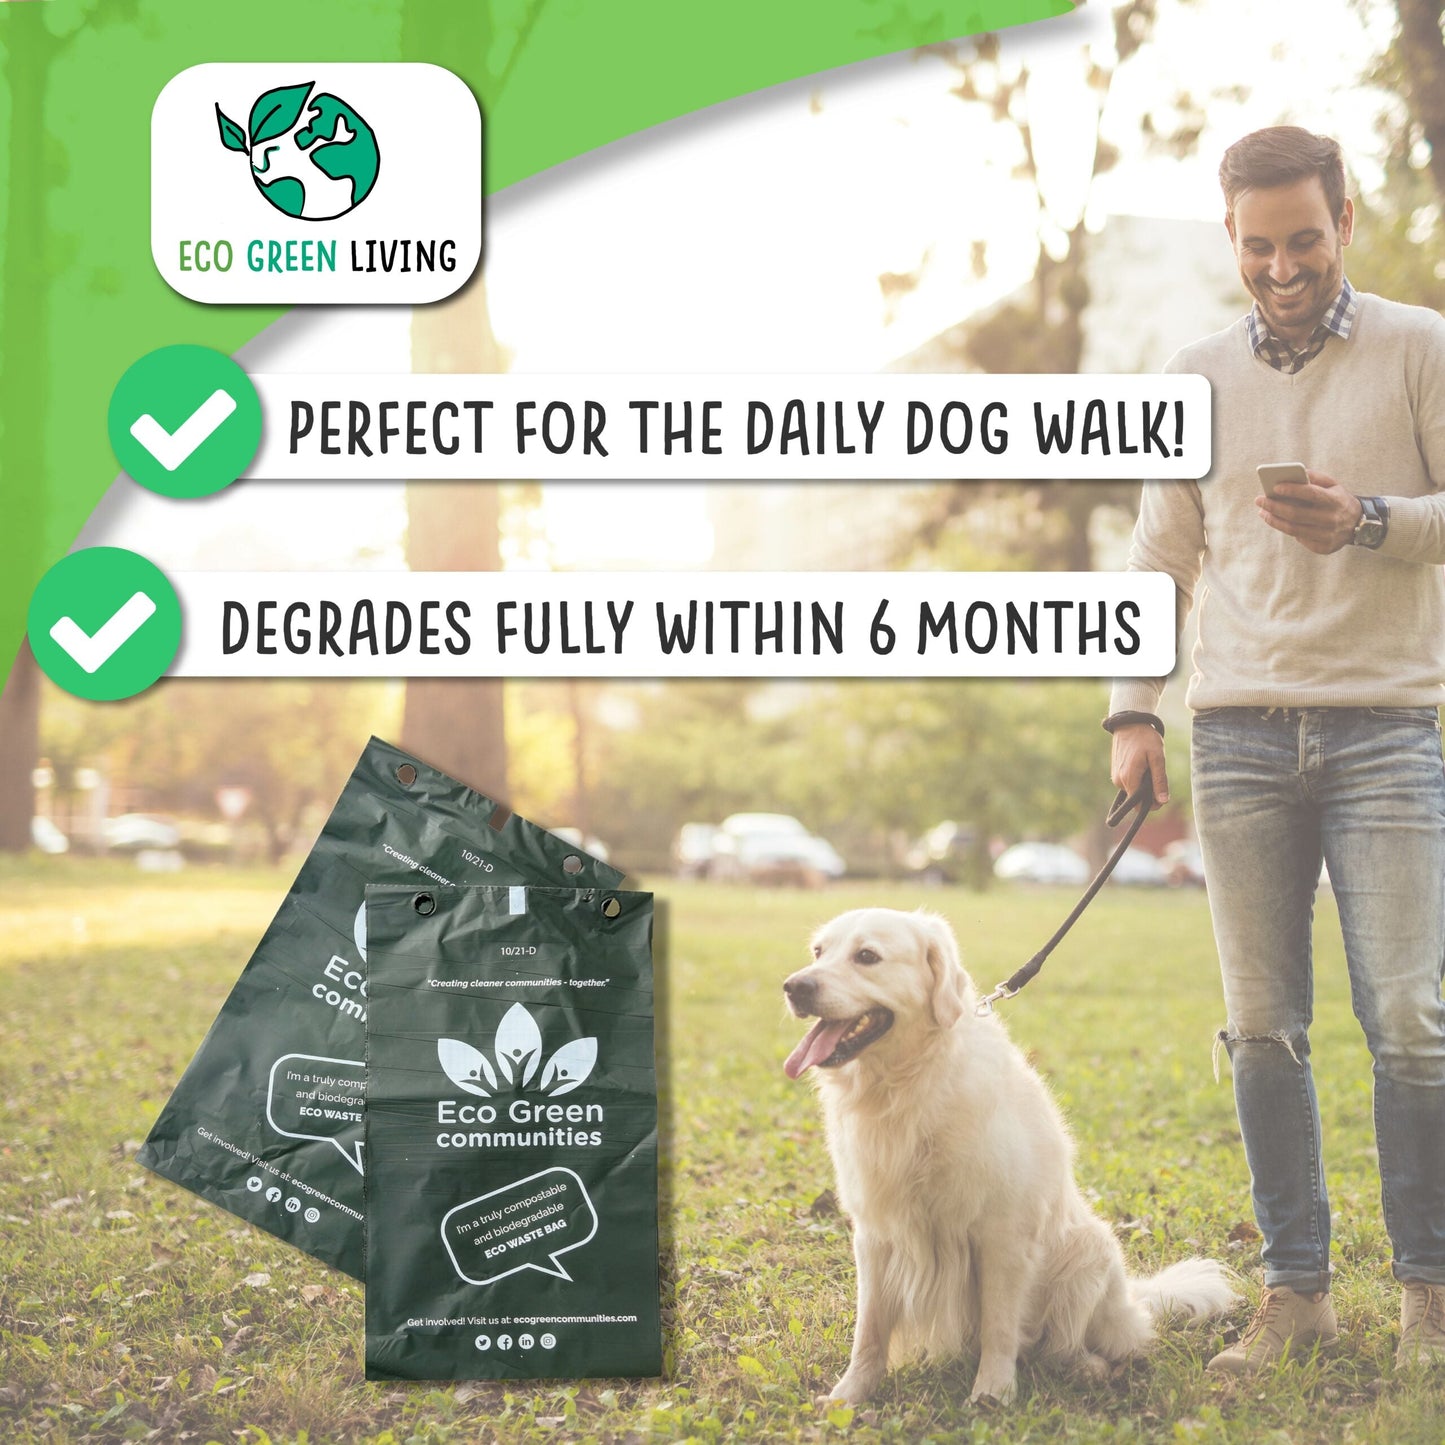 200 Compostable Dog Poop Bags - Eco Green Living